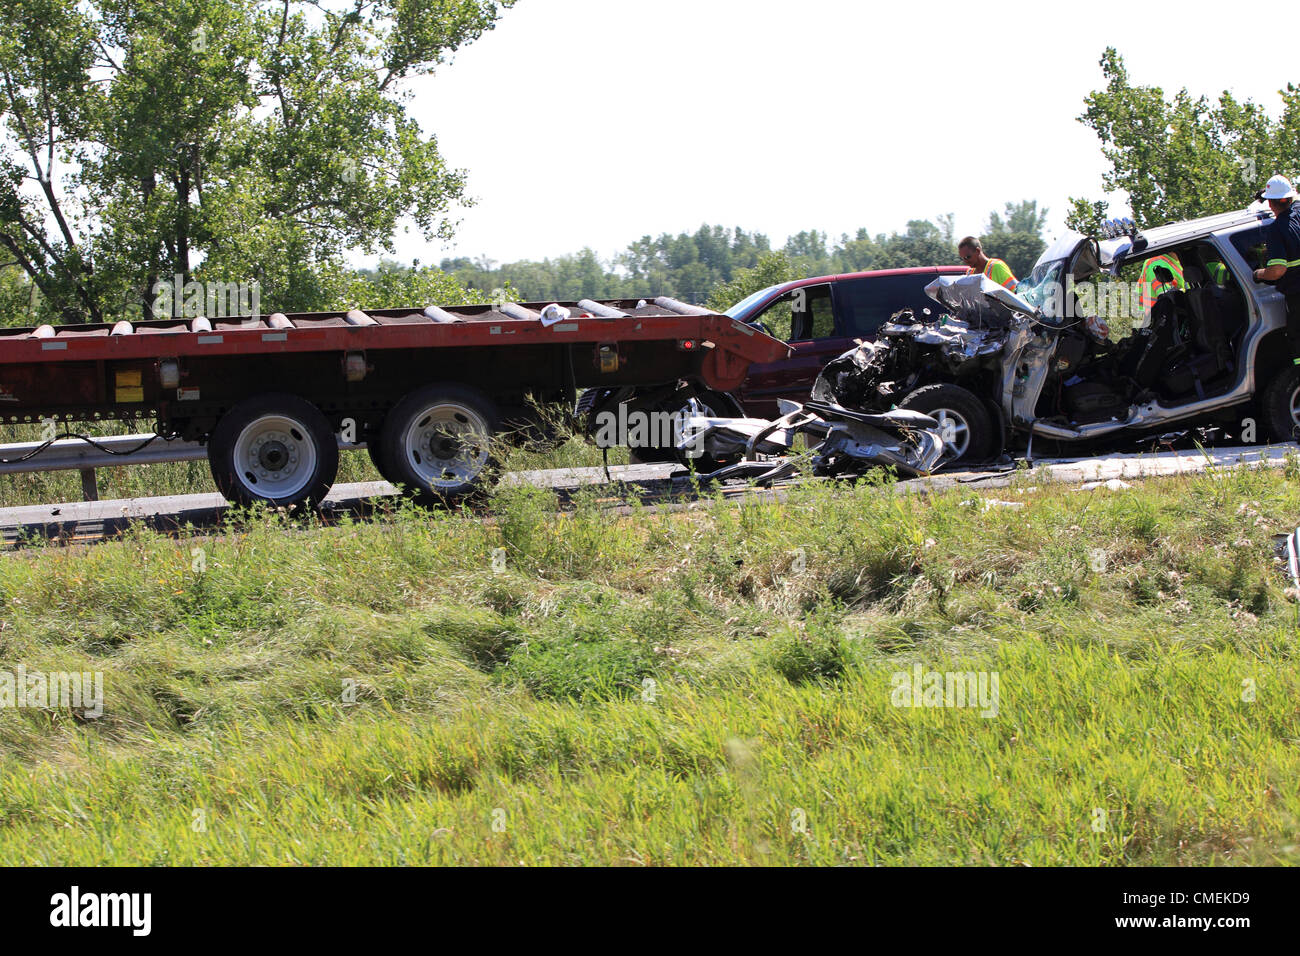 Monday, 30 July, 2012 -- Emergency workers clear the scene of a fatal accident near Hudson, Wisconsin, USA. The accident, which occurred when a Sport Utility Vehicle crashed into the rear of a flatbed semi-trailer on I-94 near mile marker 6, caused at least one fatality. Stock Photo